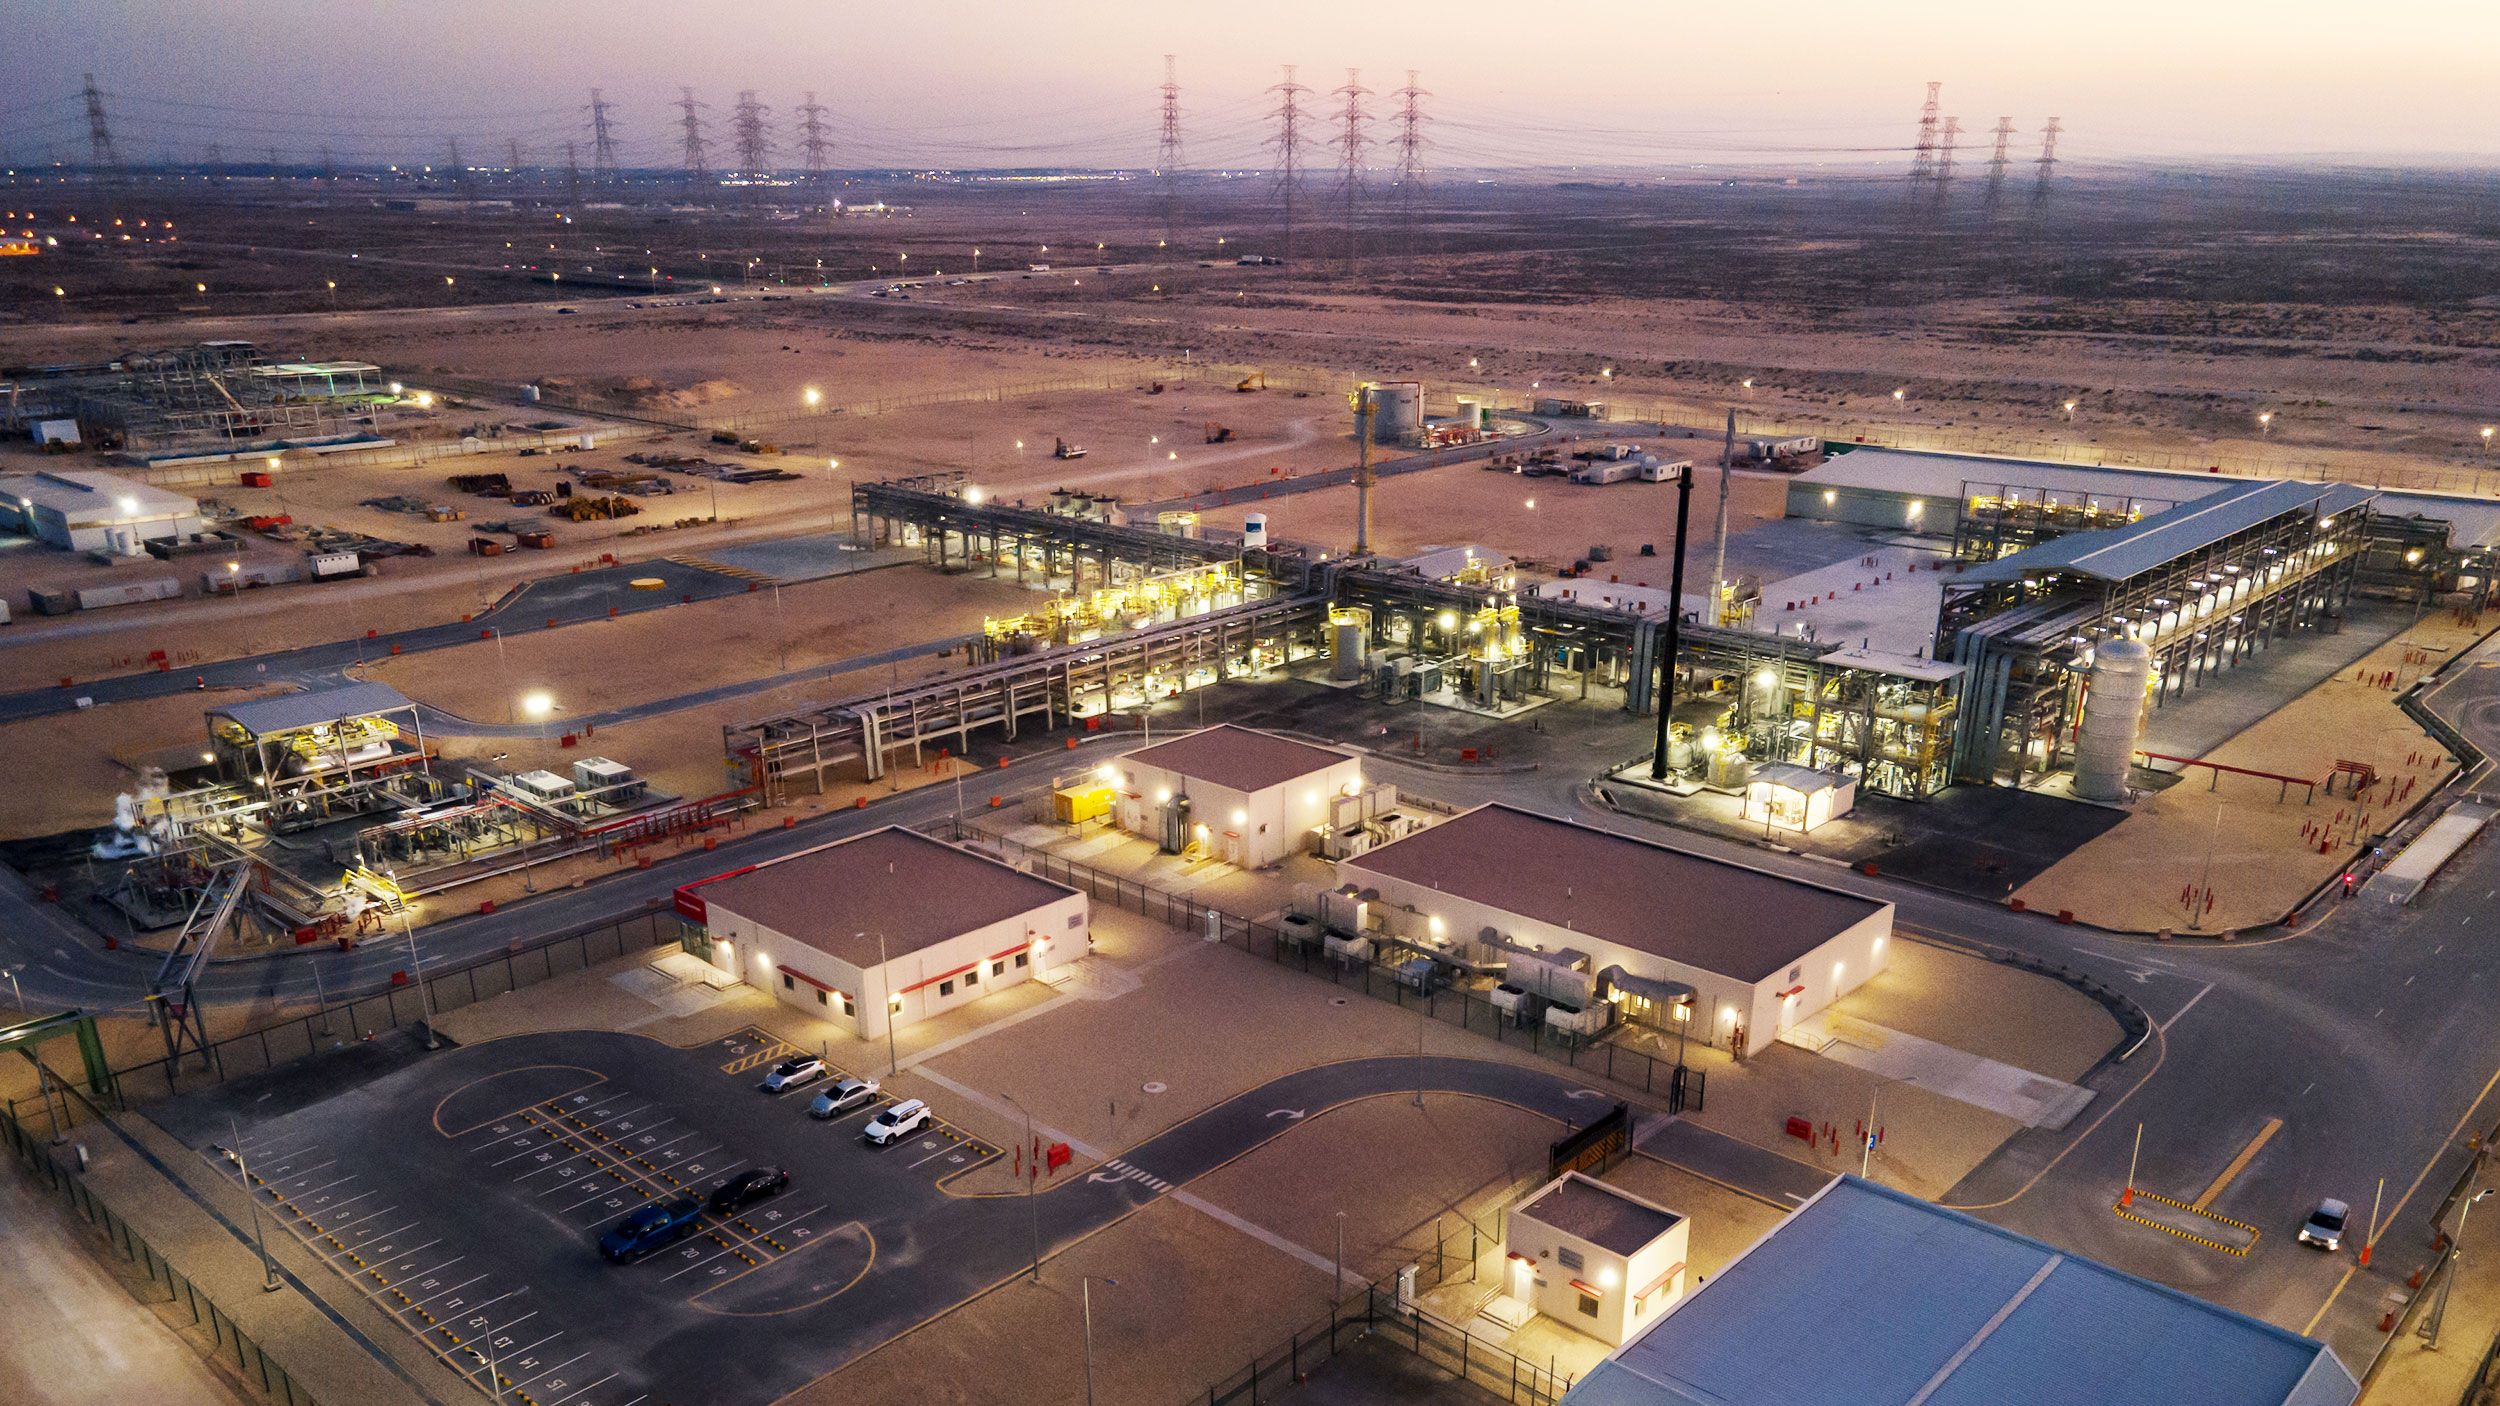 Halliburton Opens First Oilfield Specialty Chemical Manufacturing Reaction Facility in Saudi Arabia